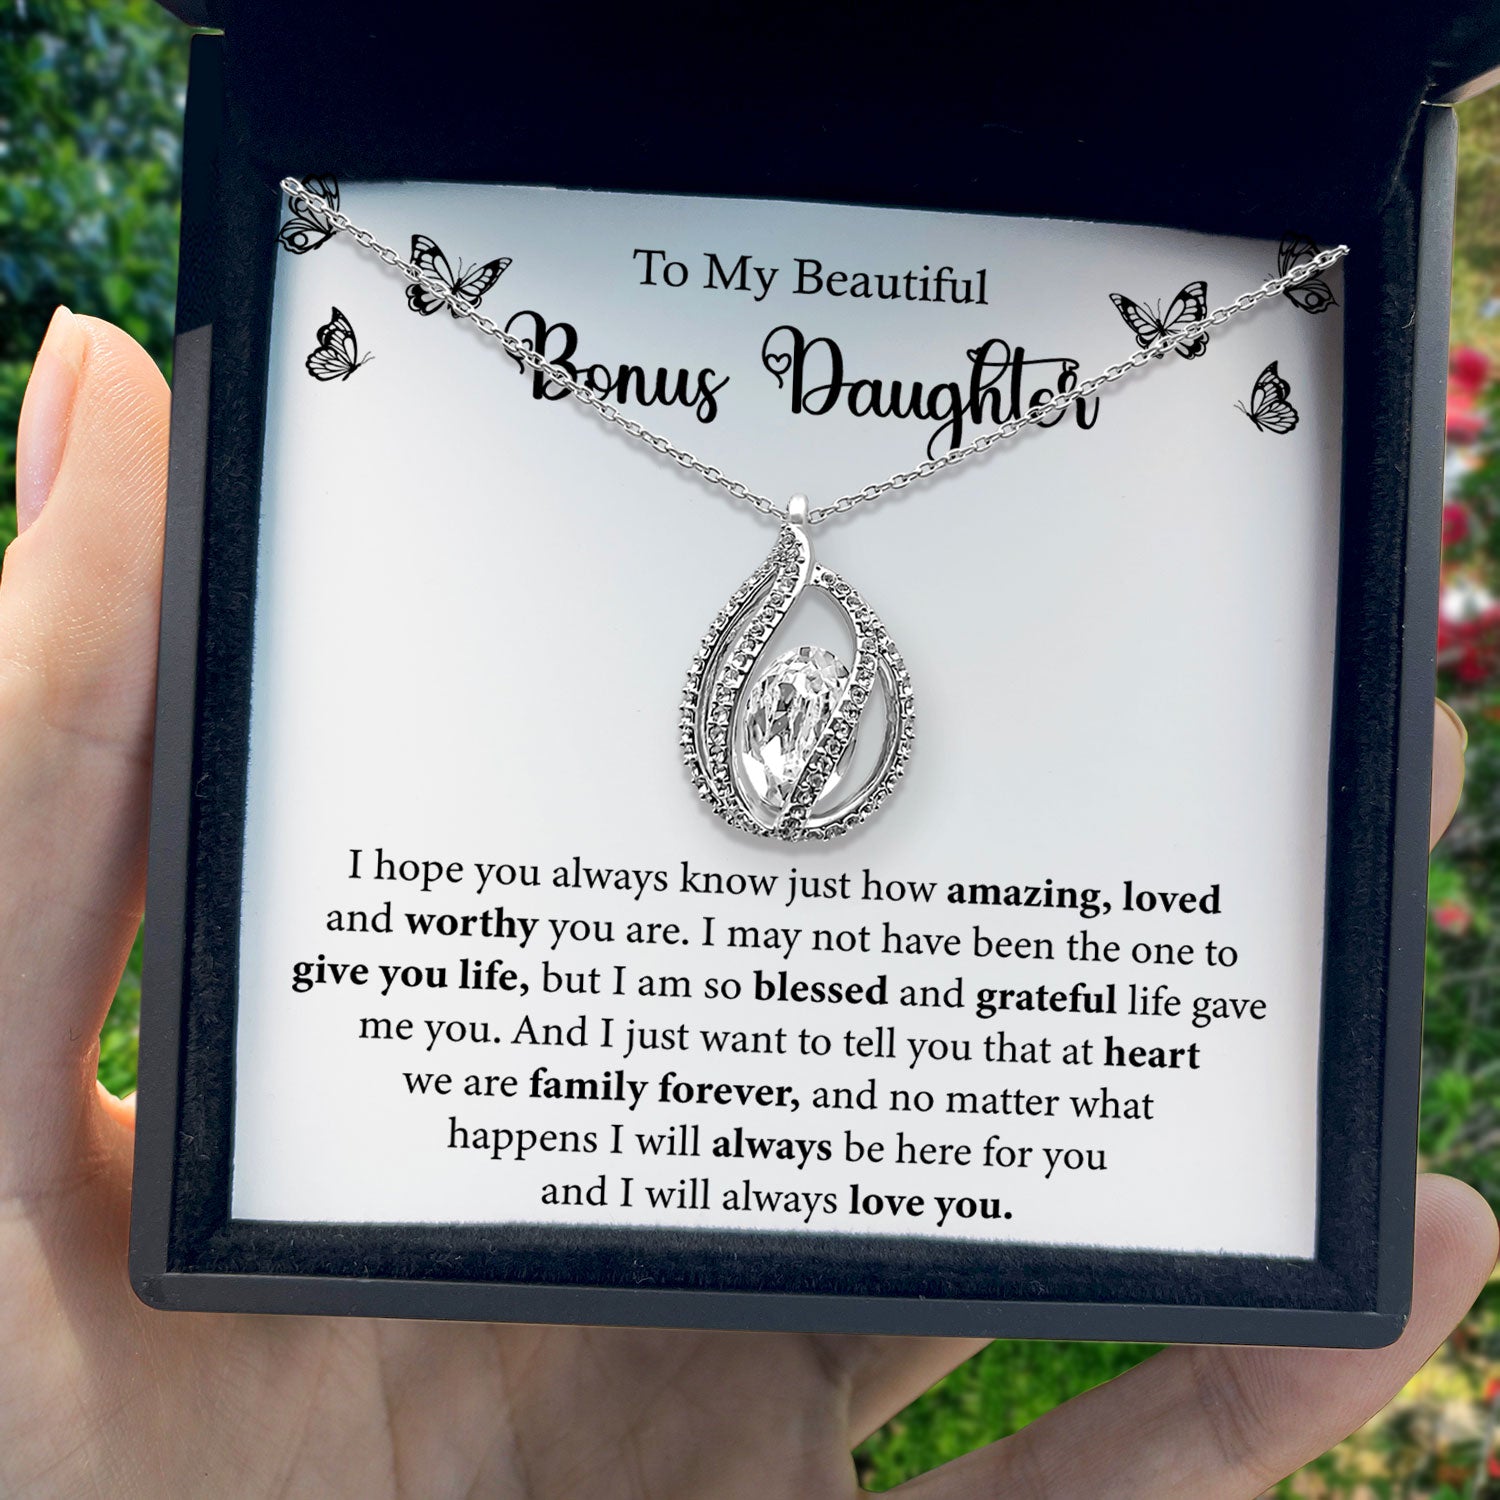 To My Beautiful Bonus Daughter - At Heart We Are Family Forever - Orbital Birdcage Necklace